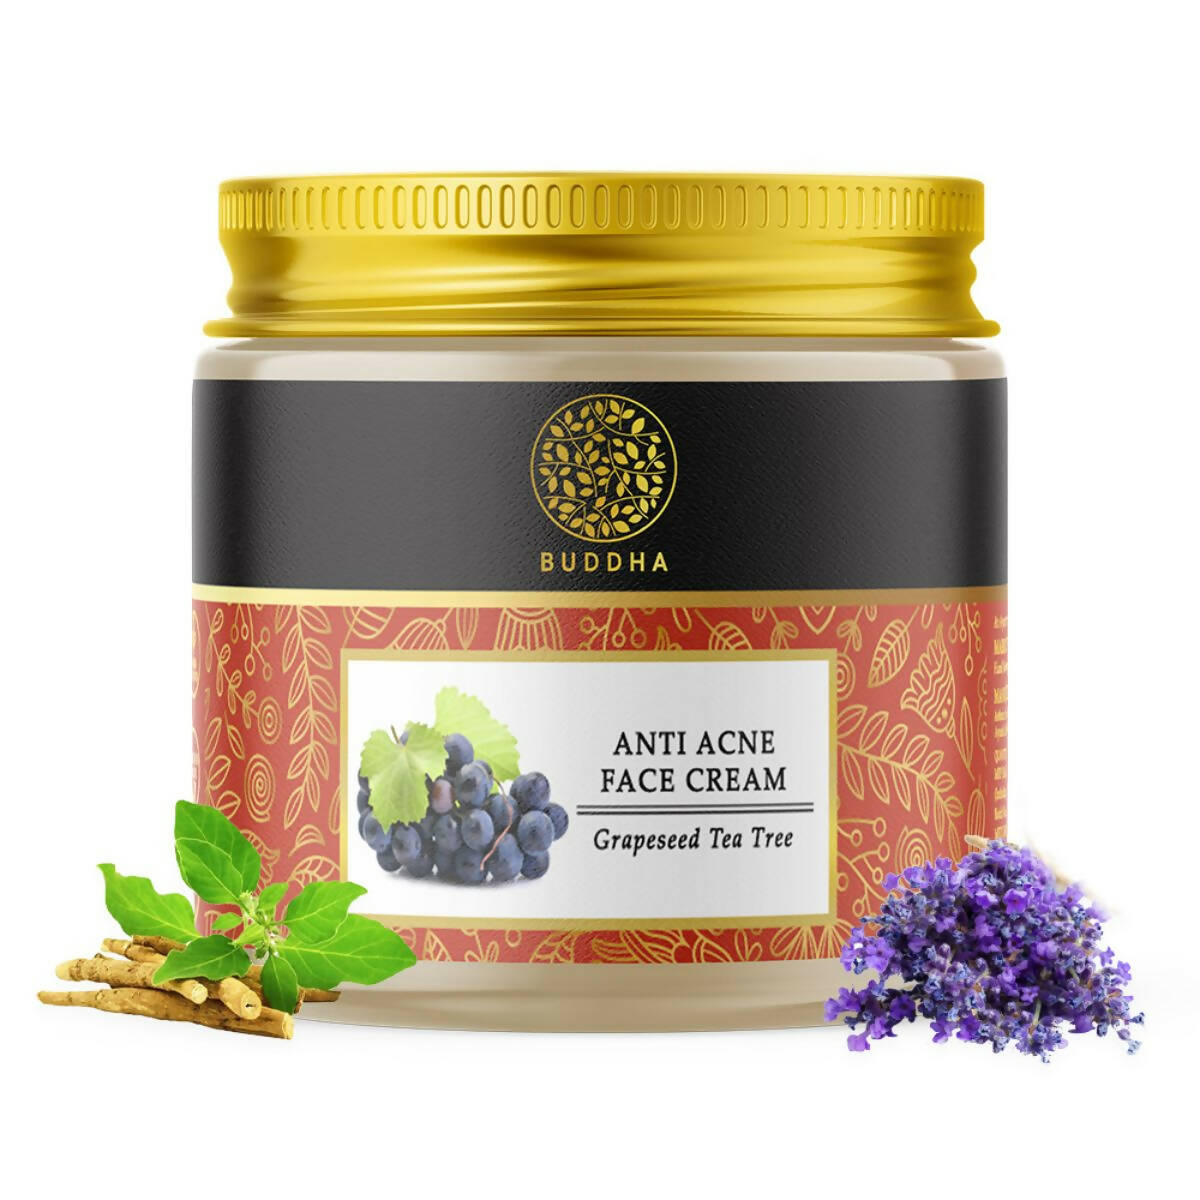 Buddha Natural Anti Acne Face Cream - For Acnes, Pimples, Scars & Marks